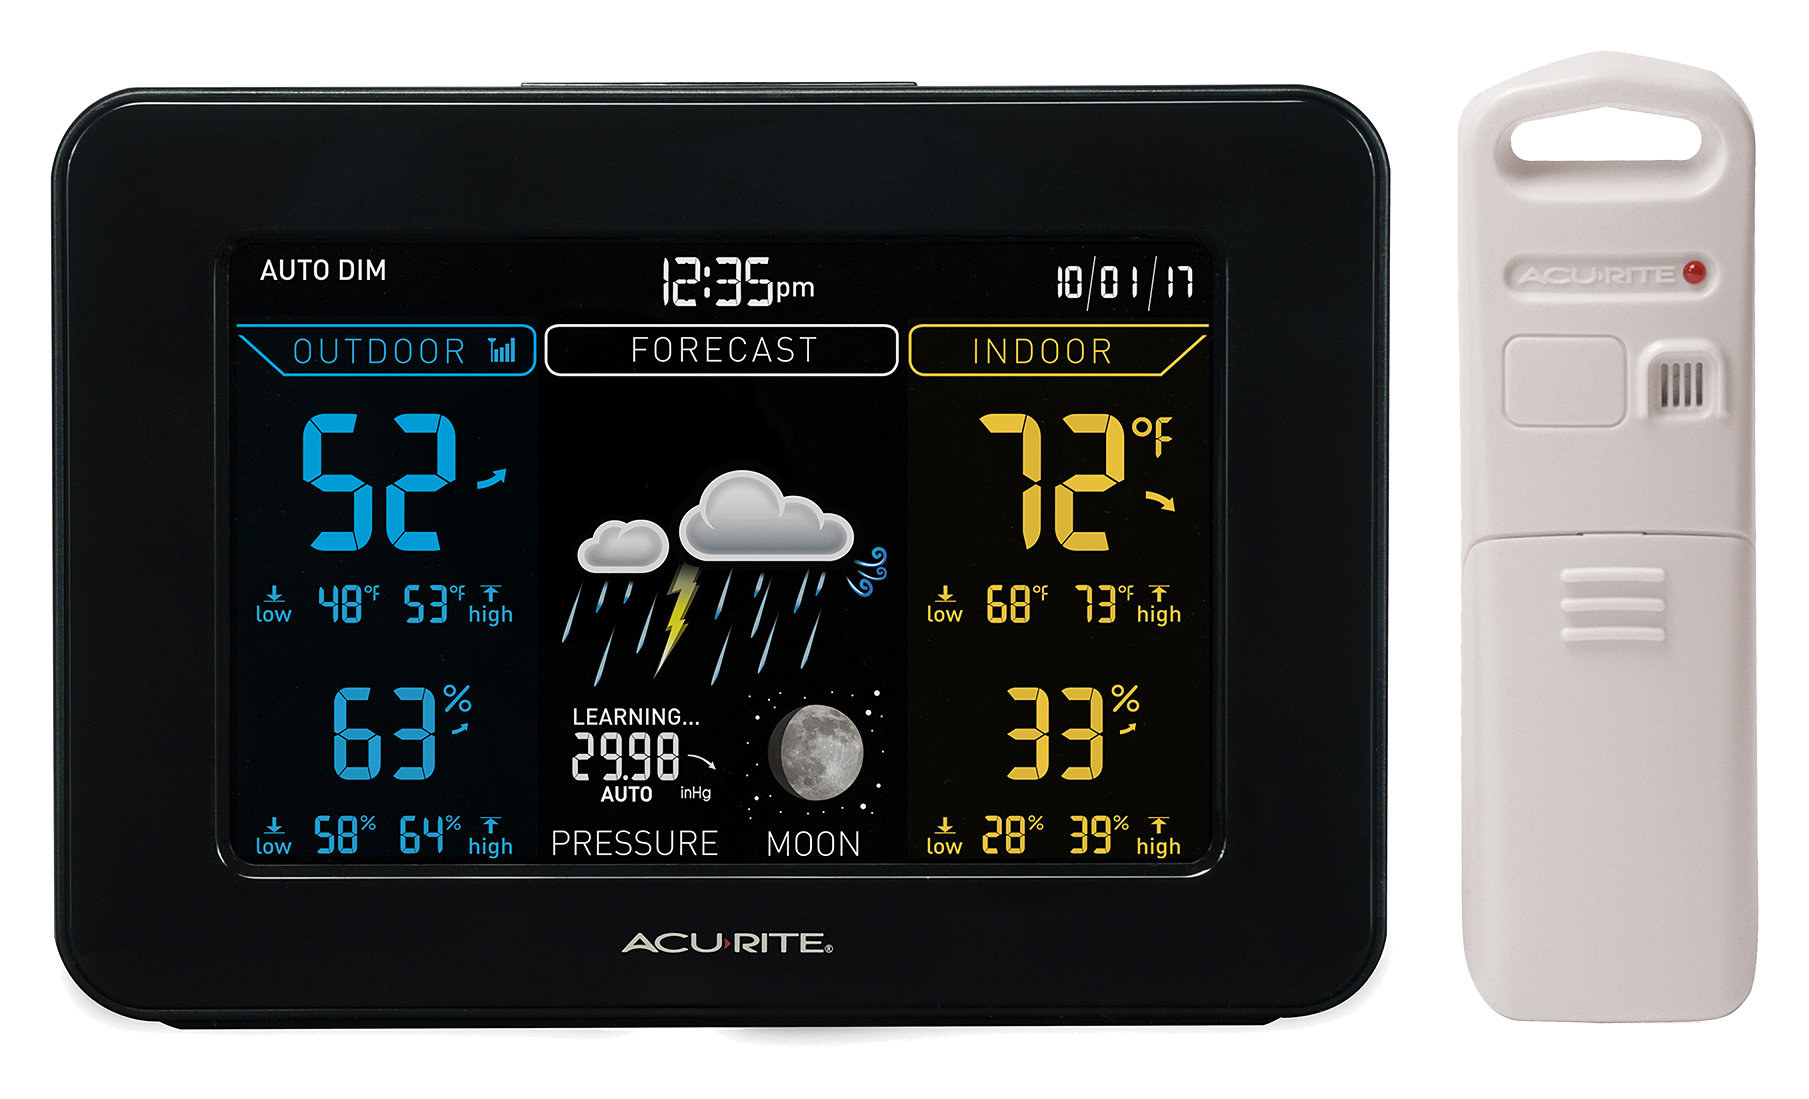 AcuRite 02027 Home Weather Station